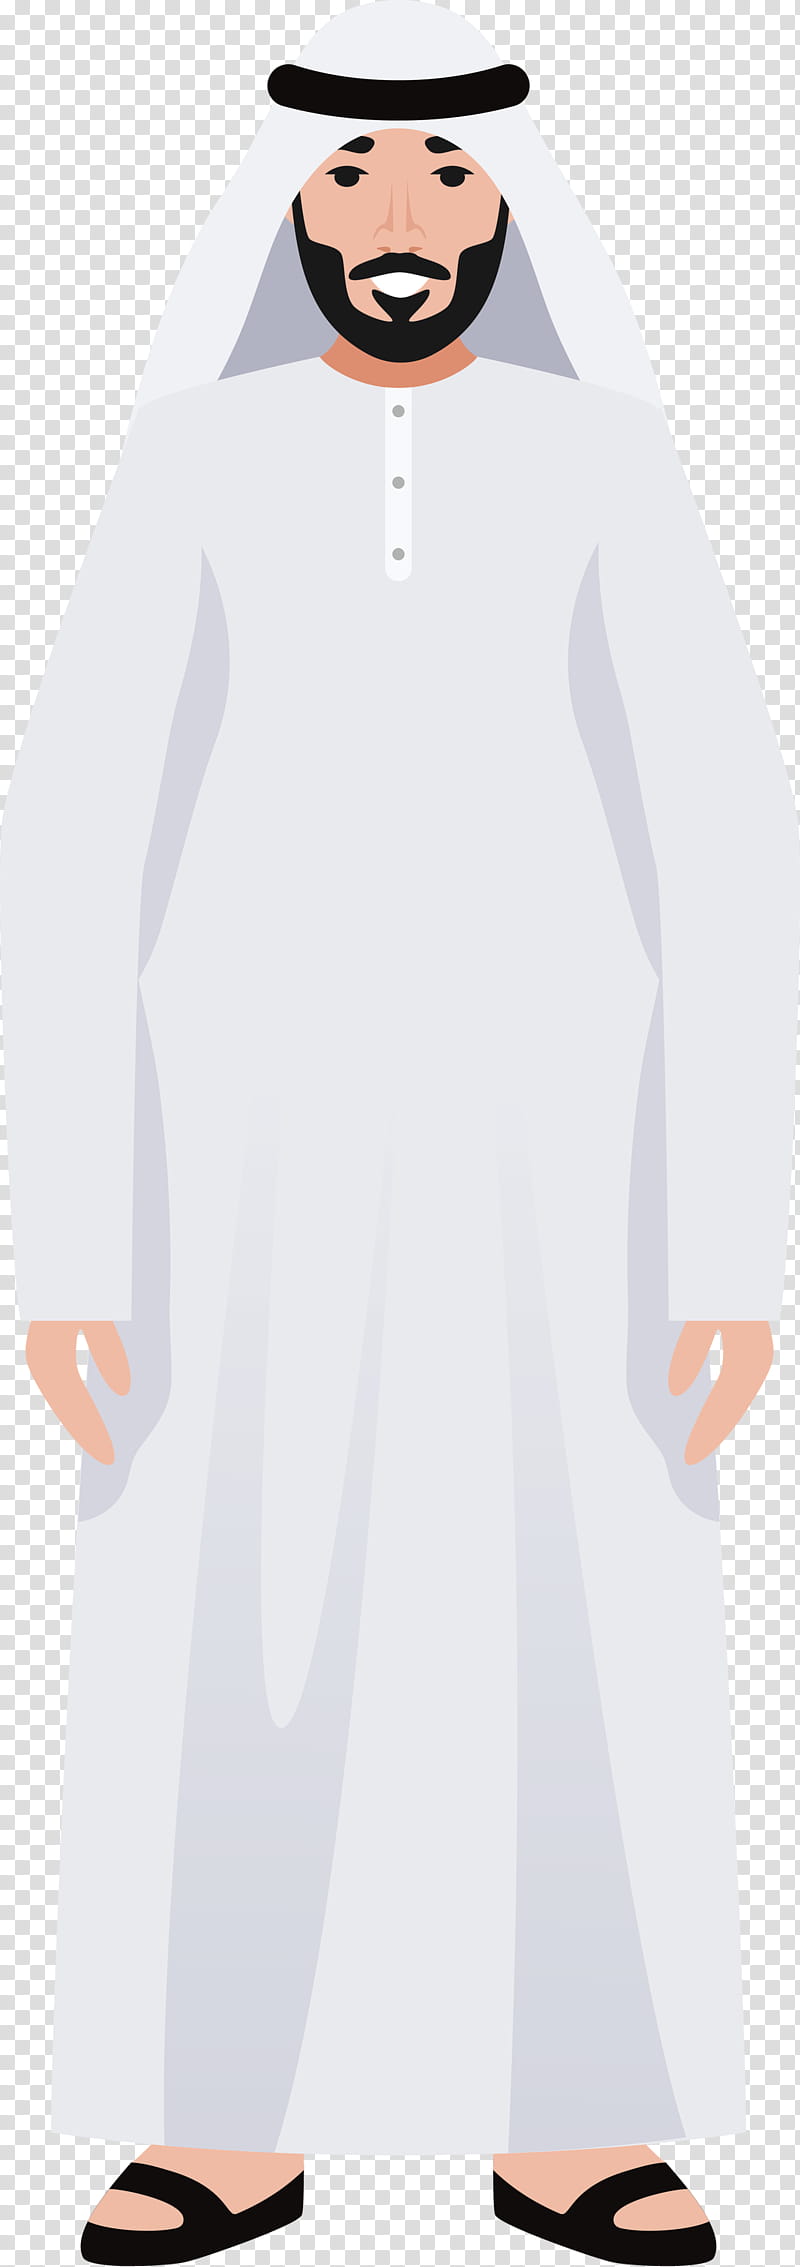 Arab Symbol, Robe, Tshirt, Sleeve, Clothing, Dress, Hoodie, Outerwear transparent background PNG clipart